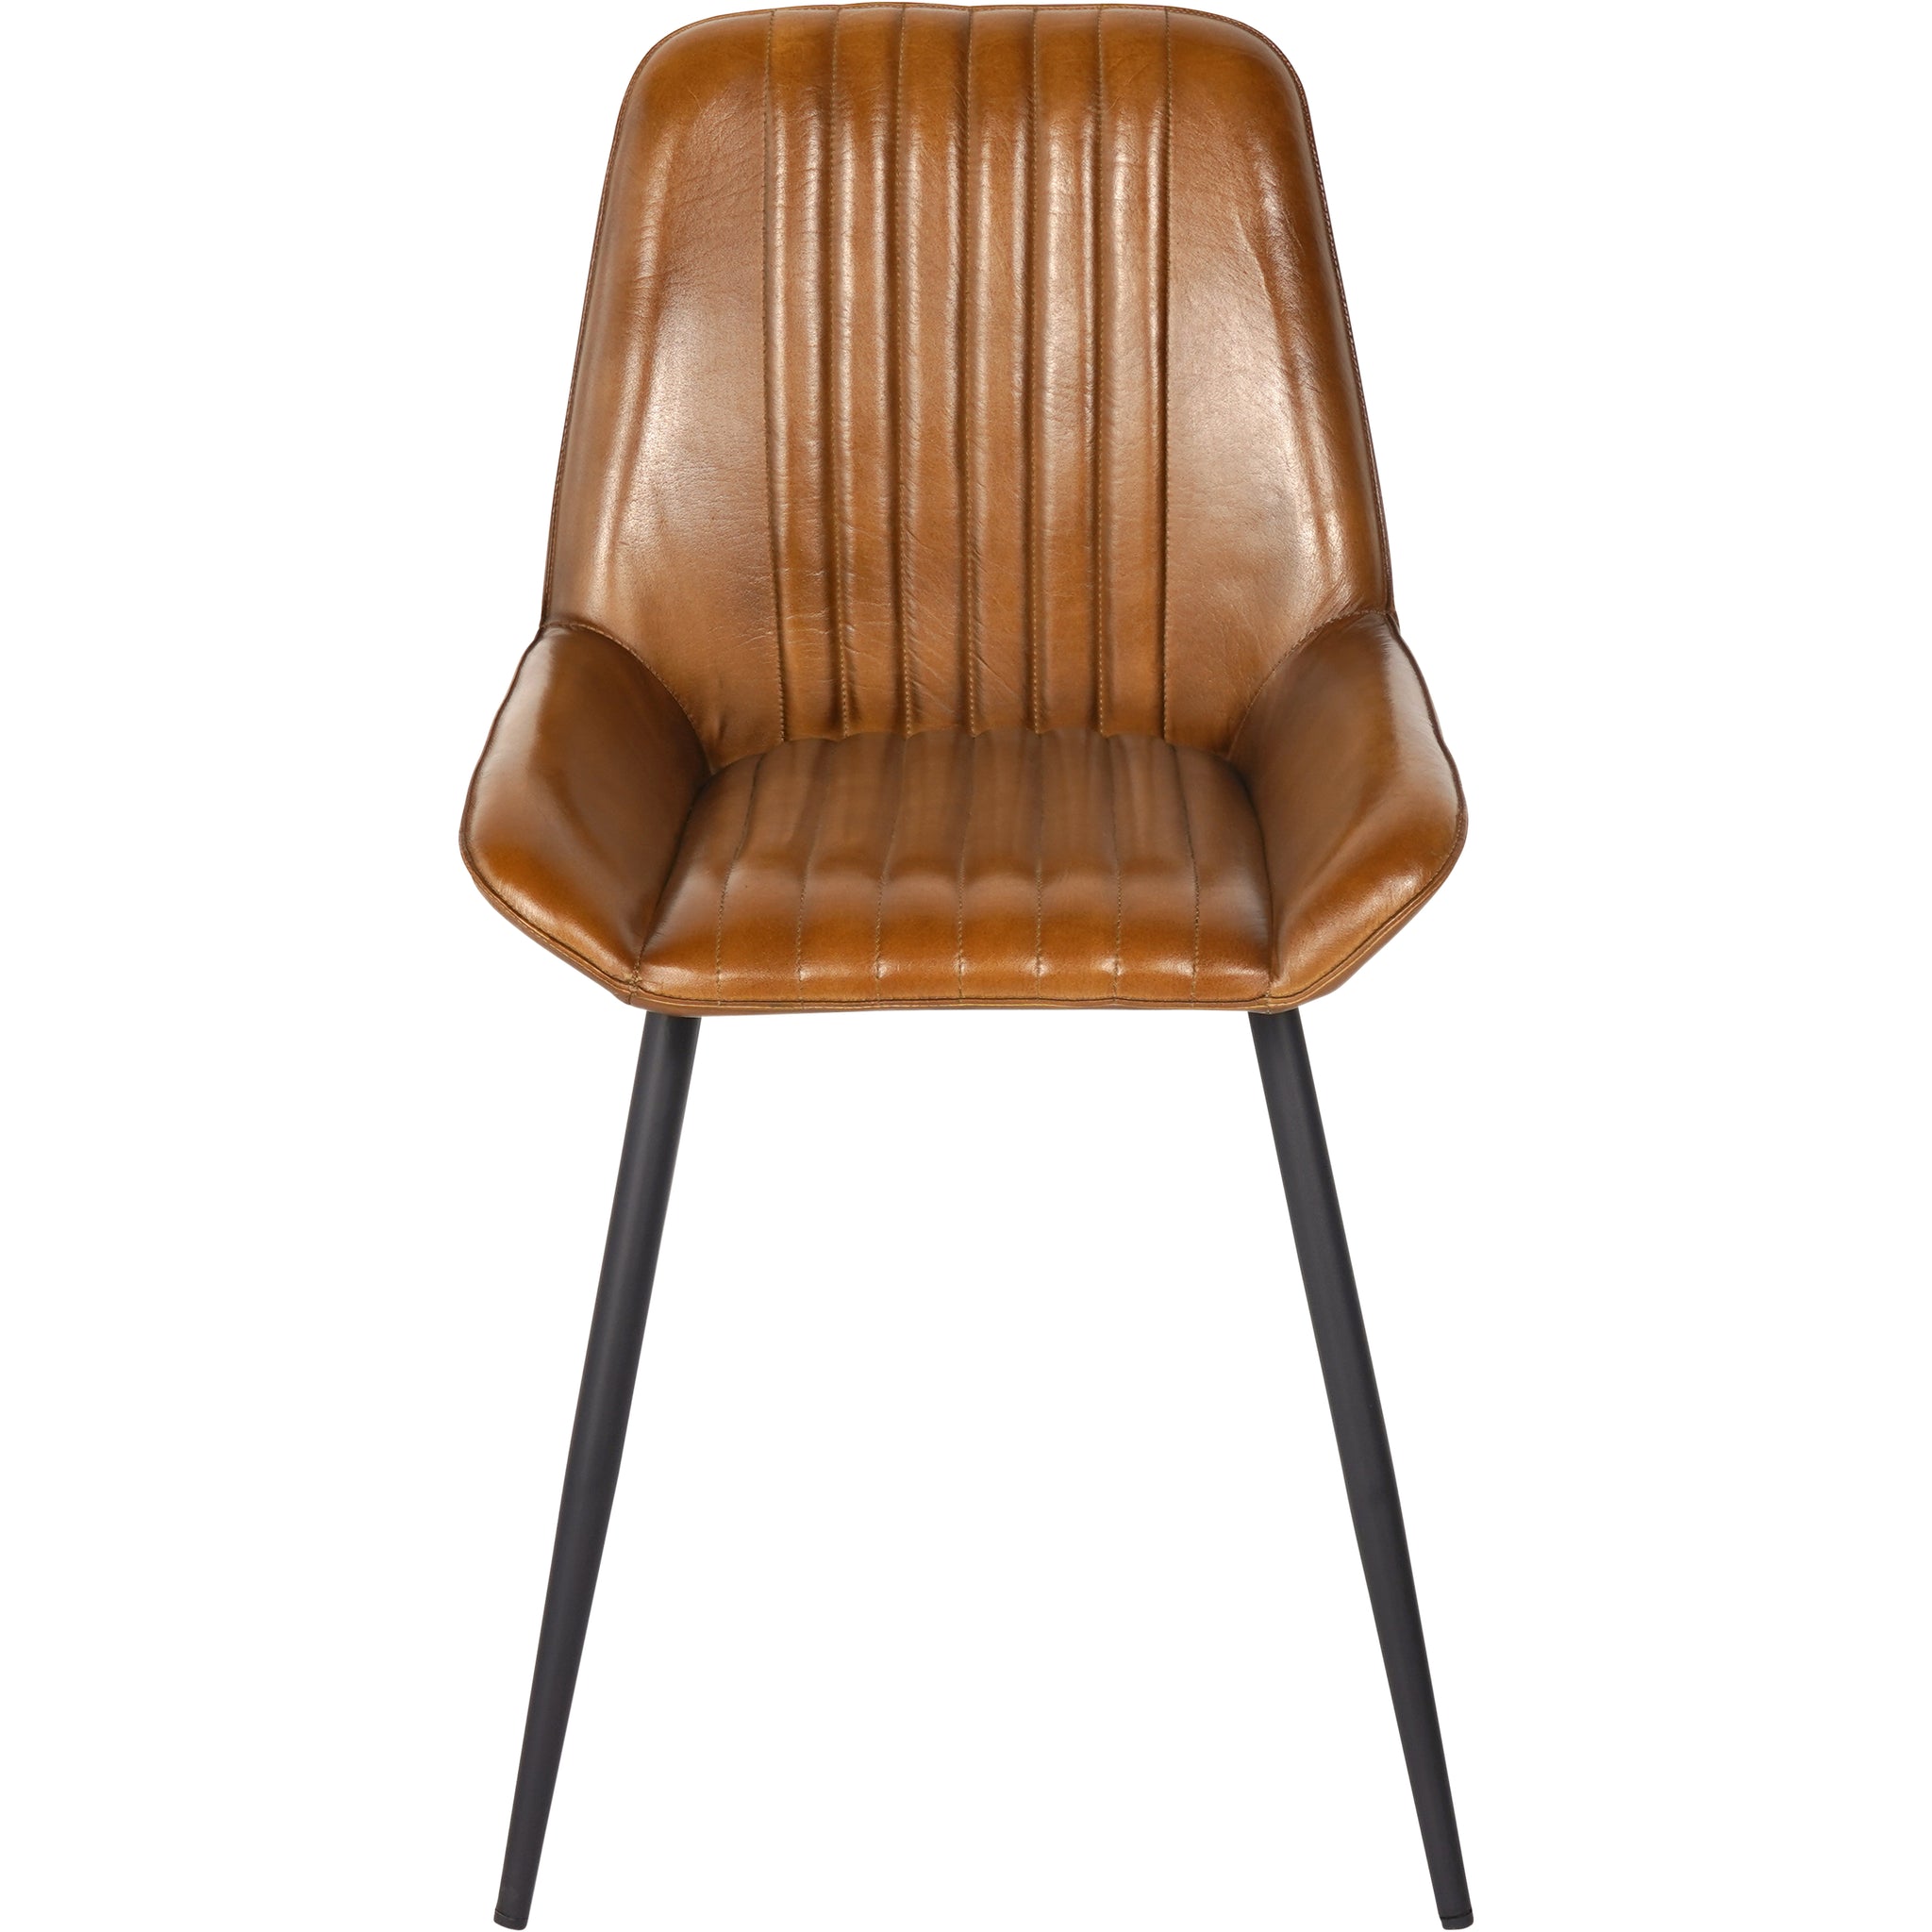 Set of 2 Boston Leather Dining Chairs in Cognac